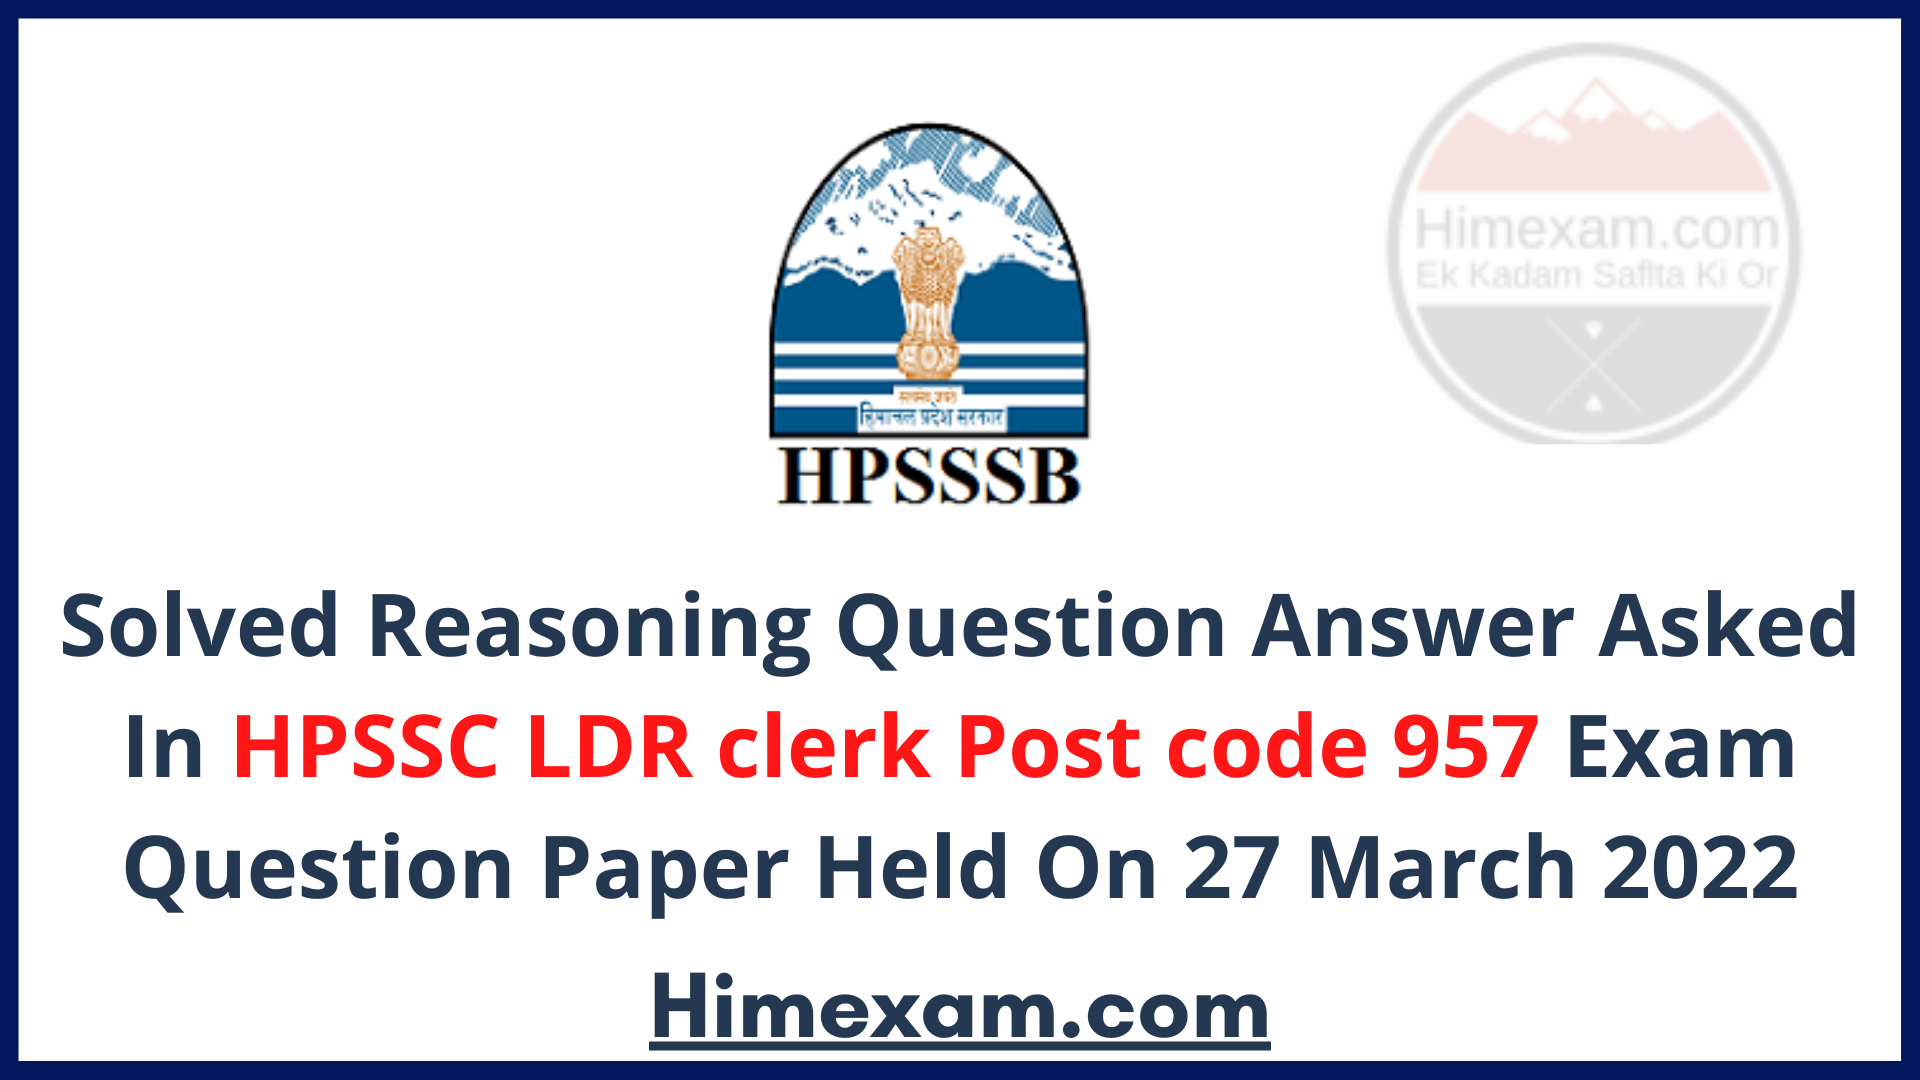 Solved Reasoning Question Answer Asked In HPSSC LDR clerk Post code 957 Exam Question Paper Held On 27 March 2022